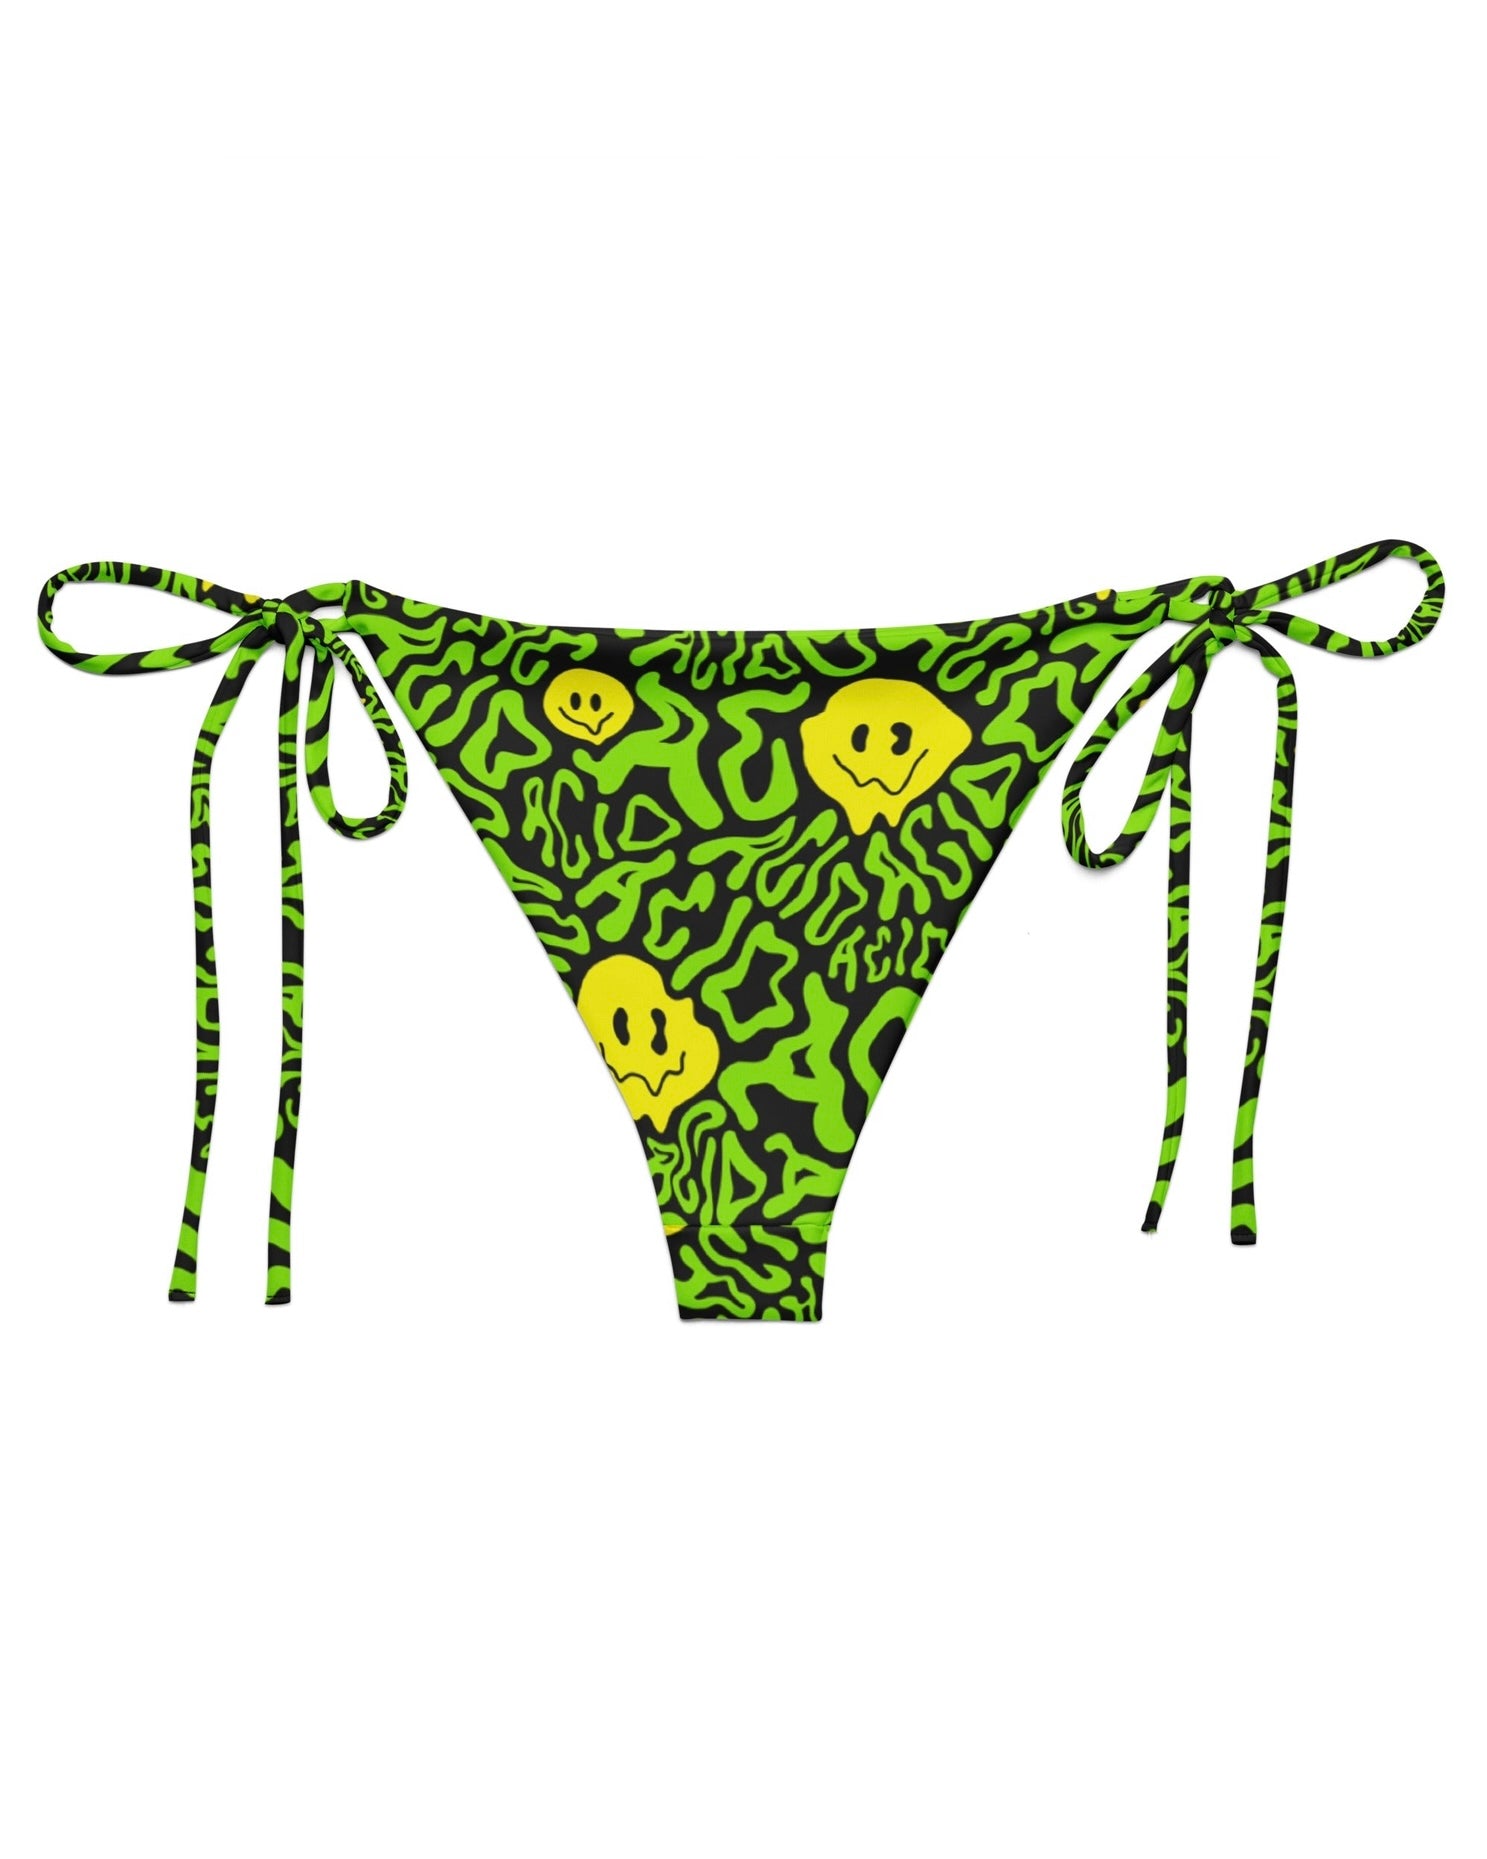 The back of the Acid Smilez String Bottoms by One Stop Rave on a white background.